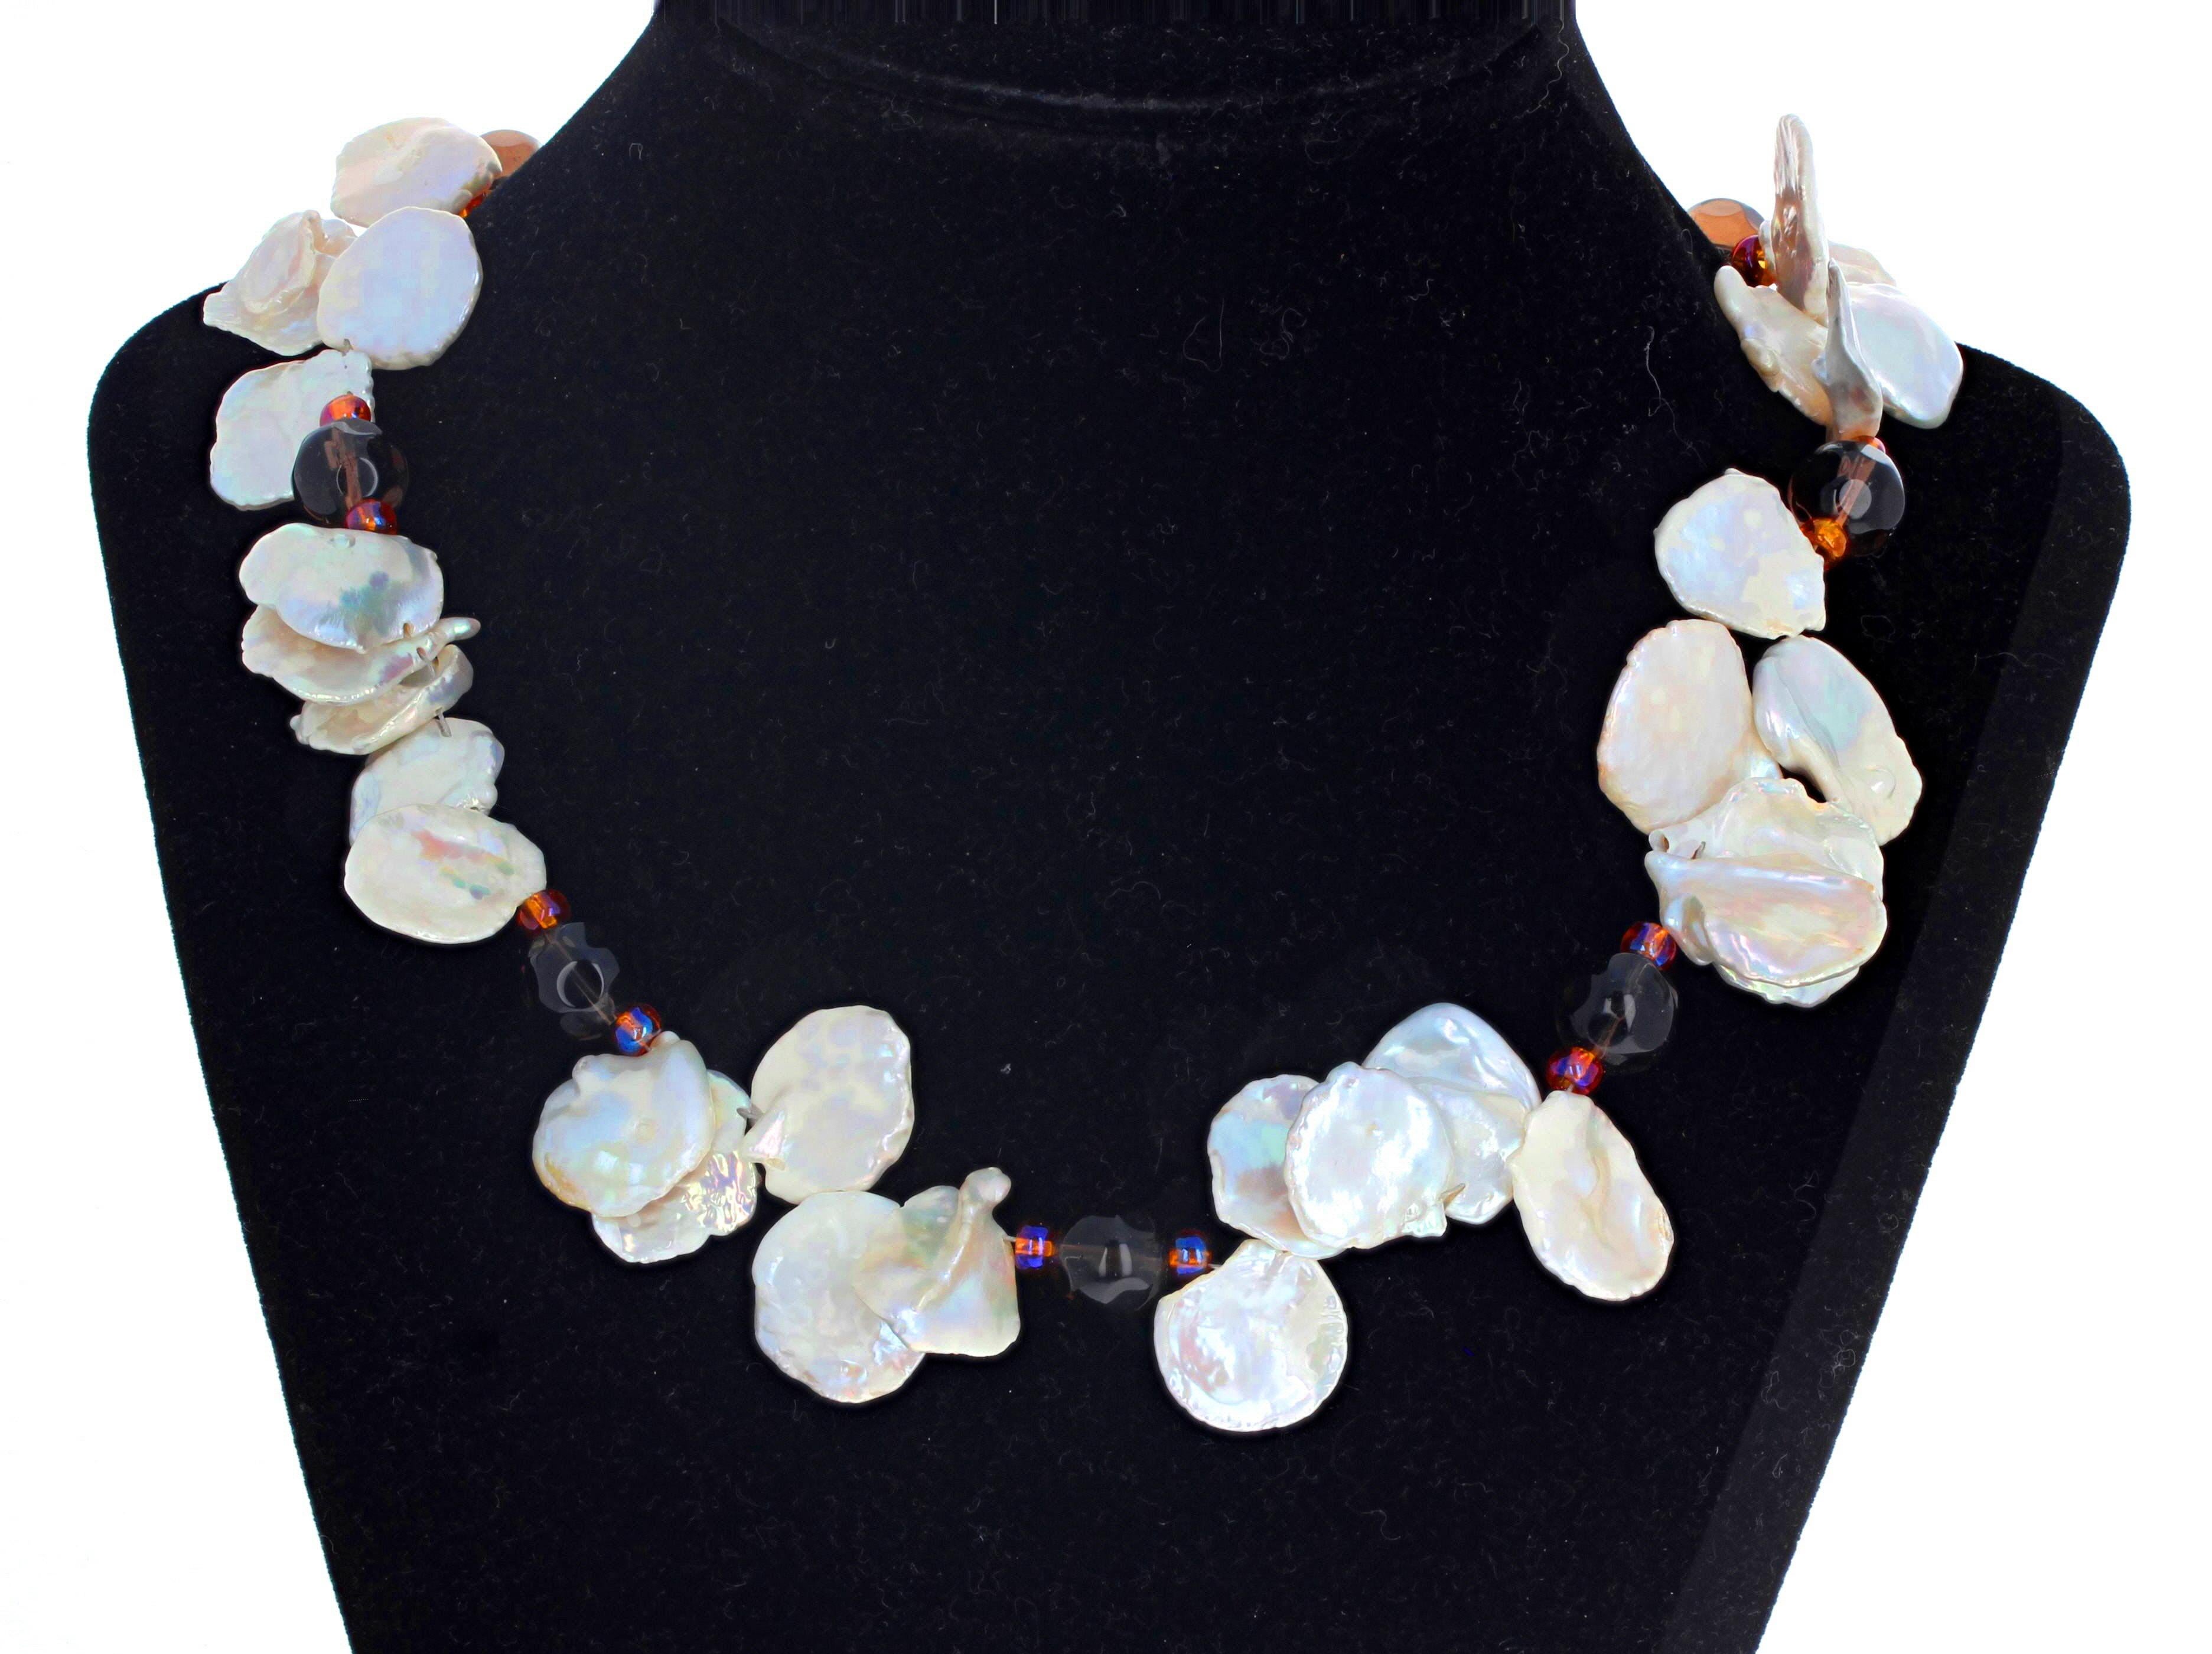 Mixed Cut AJD Elegant Natural Keshi Pearls & Highly Polished Gemcut Smoky Quartz Necklace For Sale